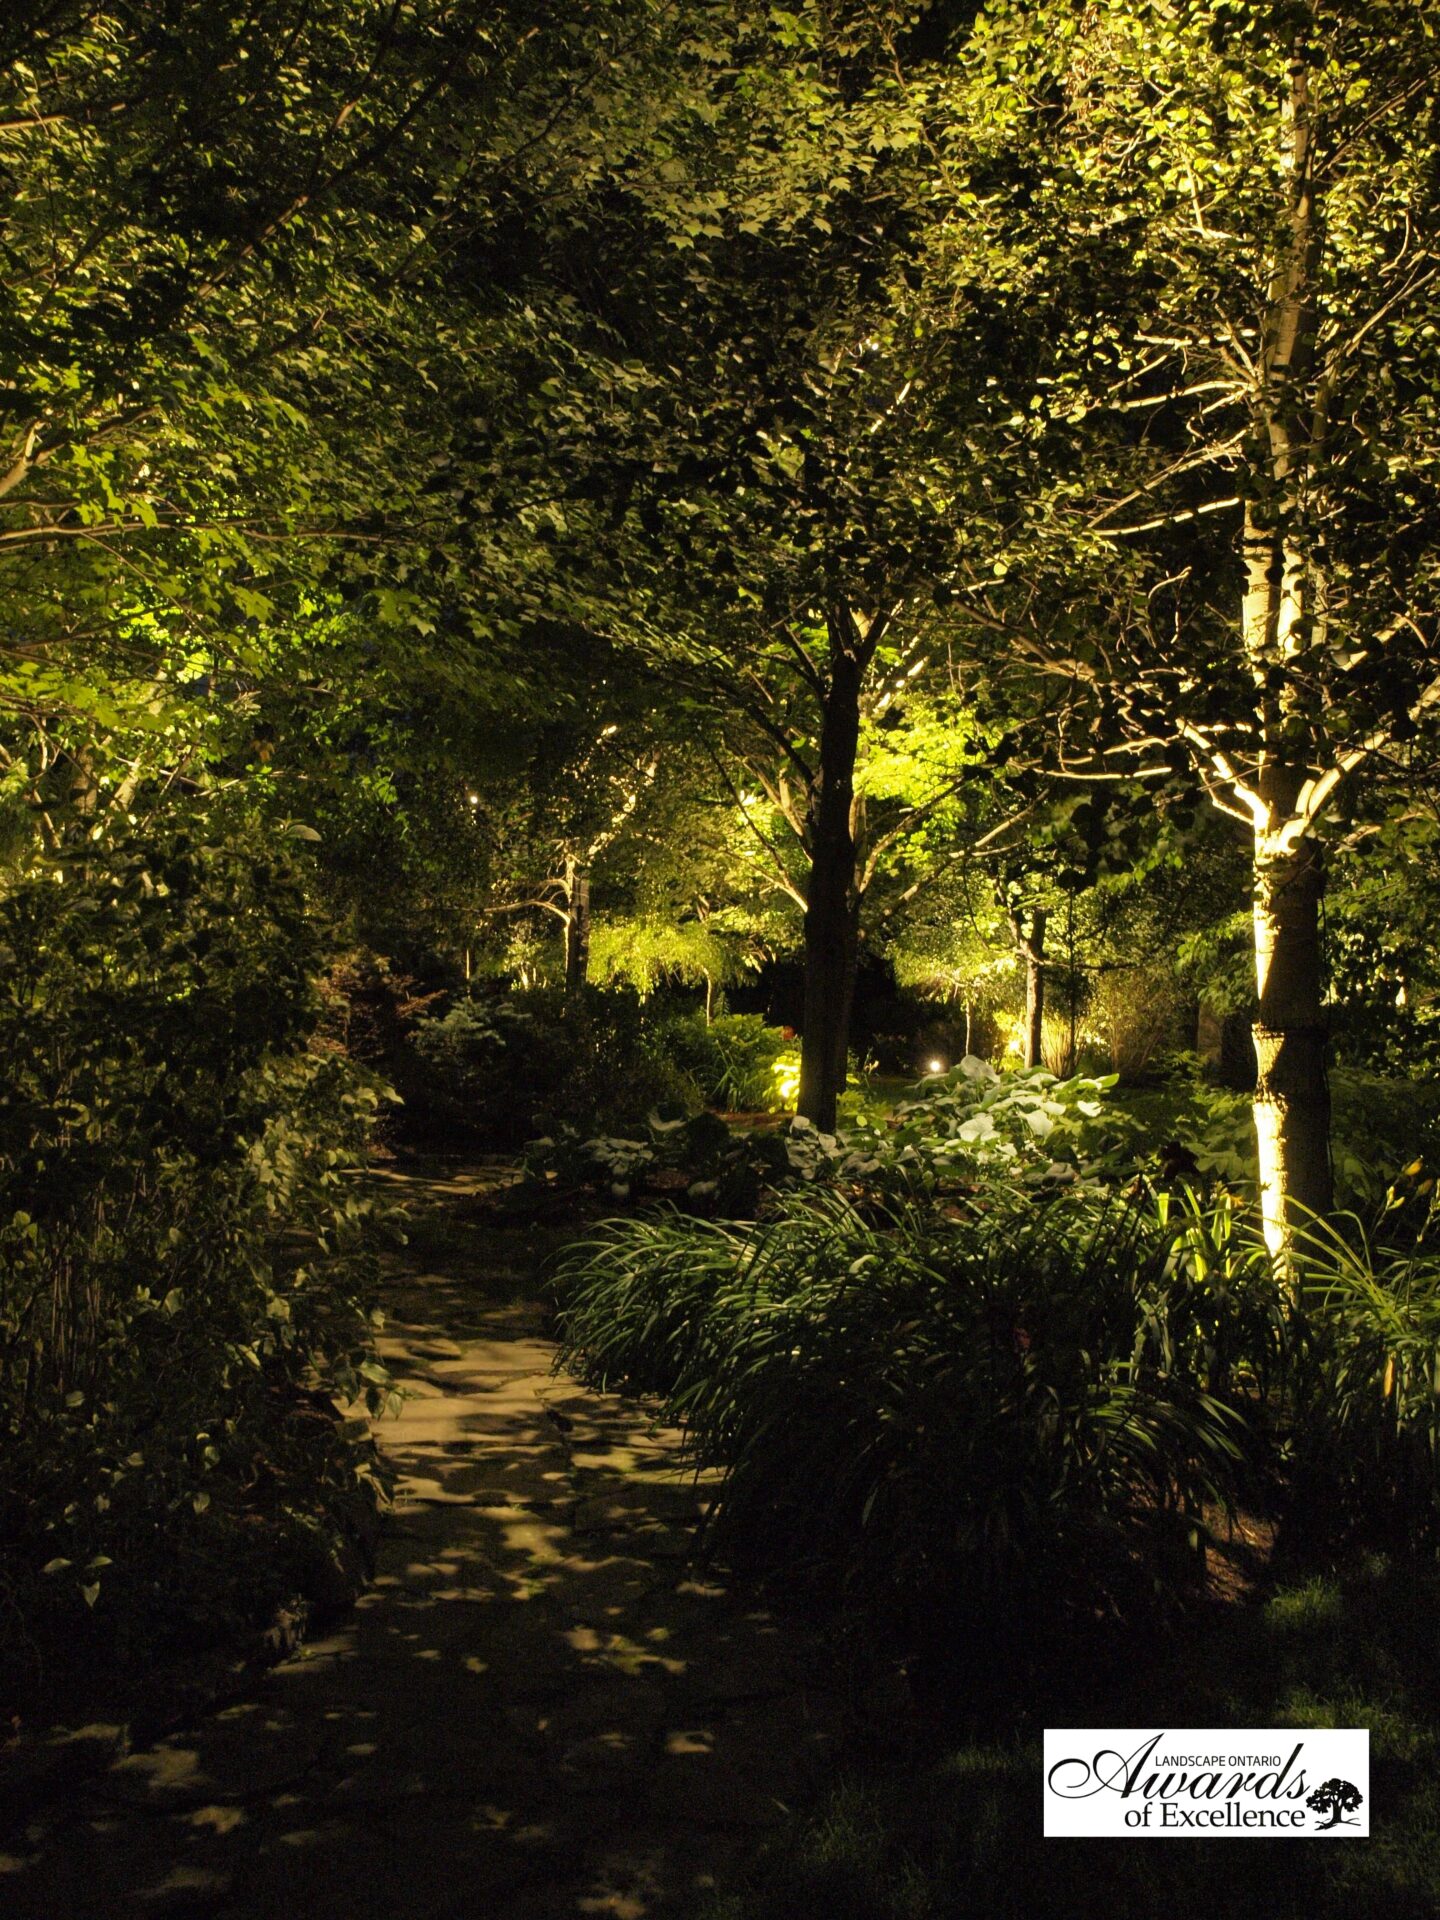 A path in a wooded area is lit up at night.